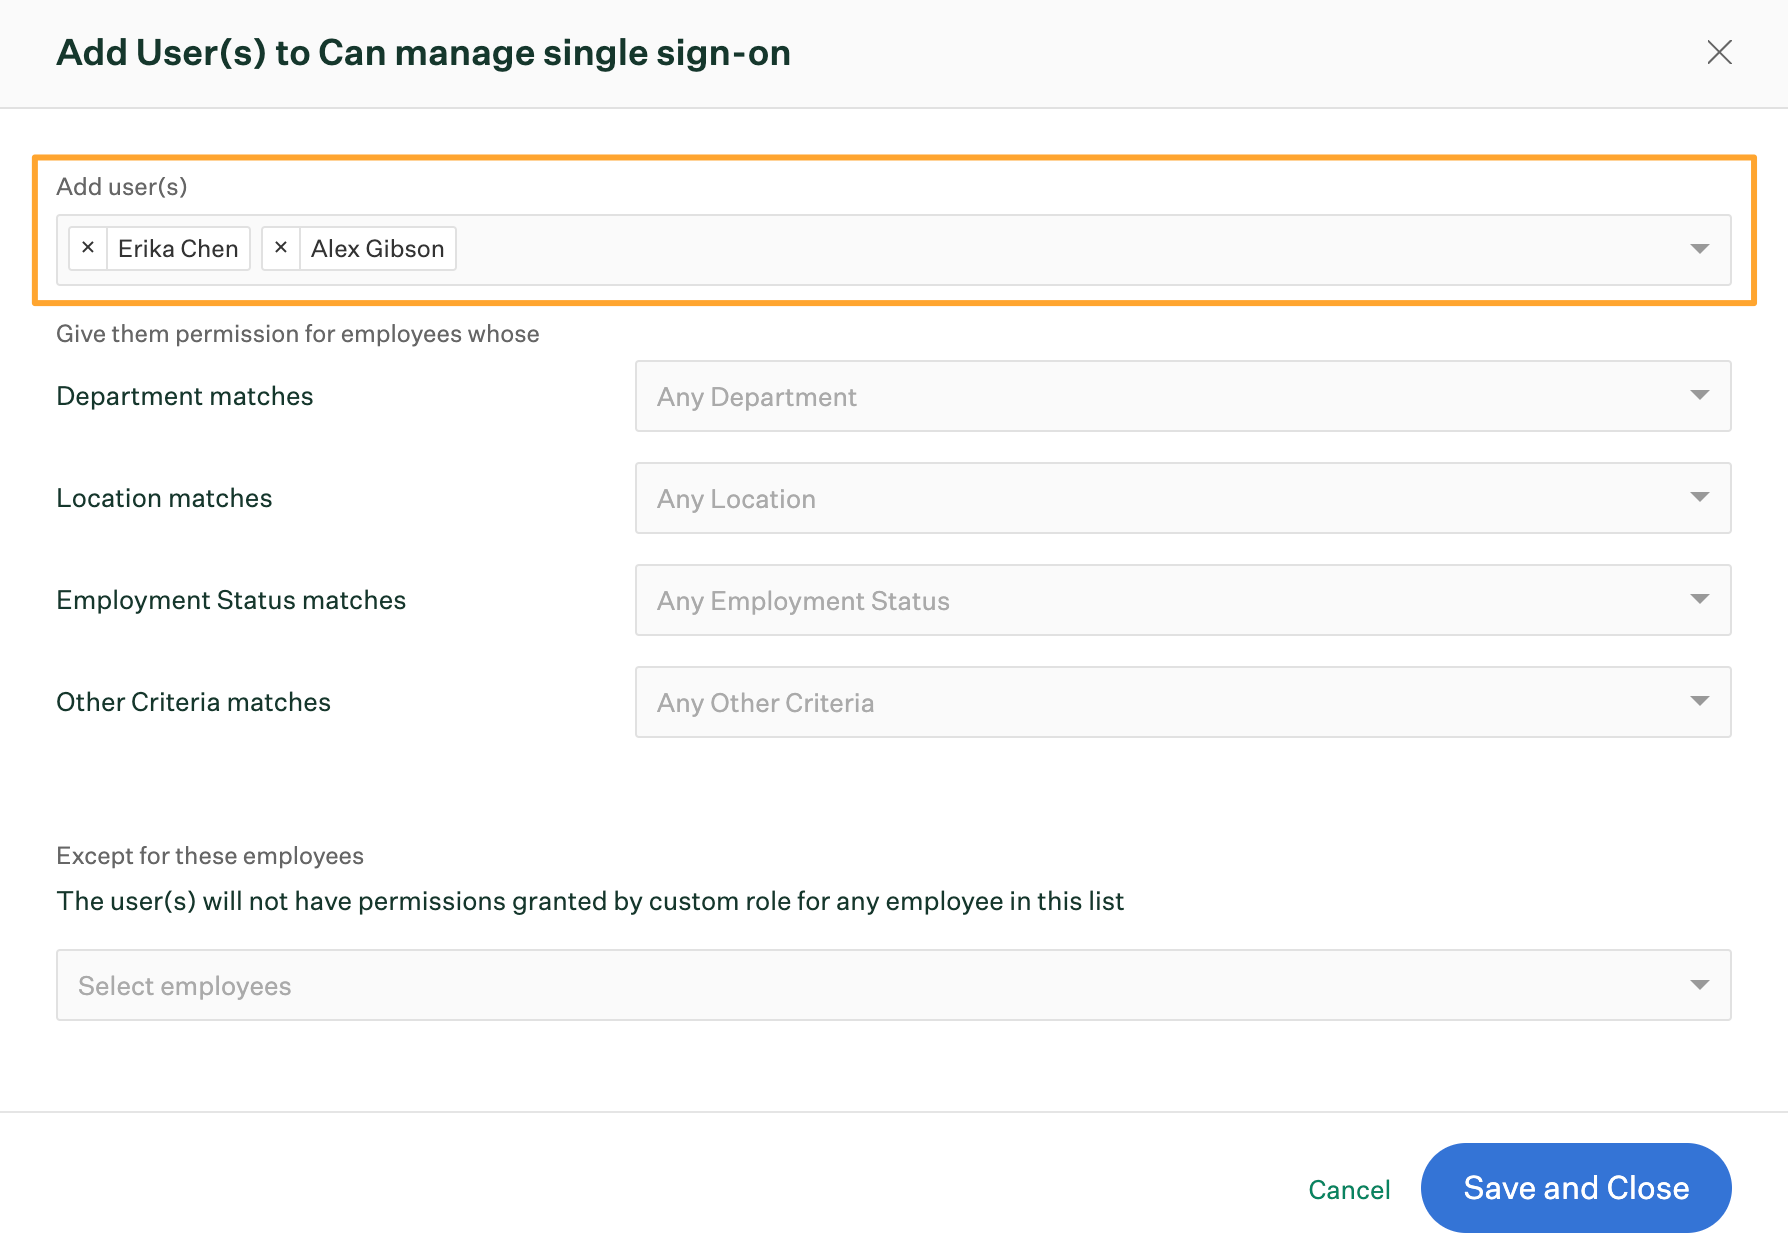 Add Users dialog box for new custom role with two users selected to gain single sign on permission